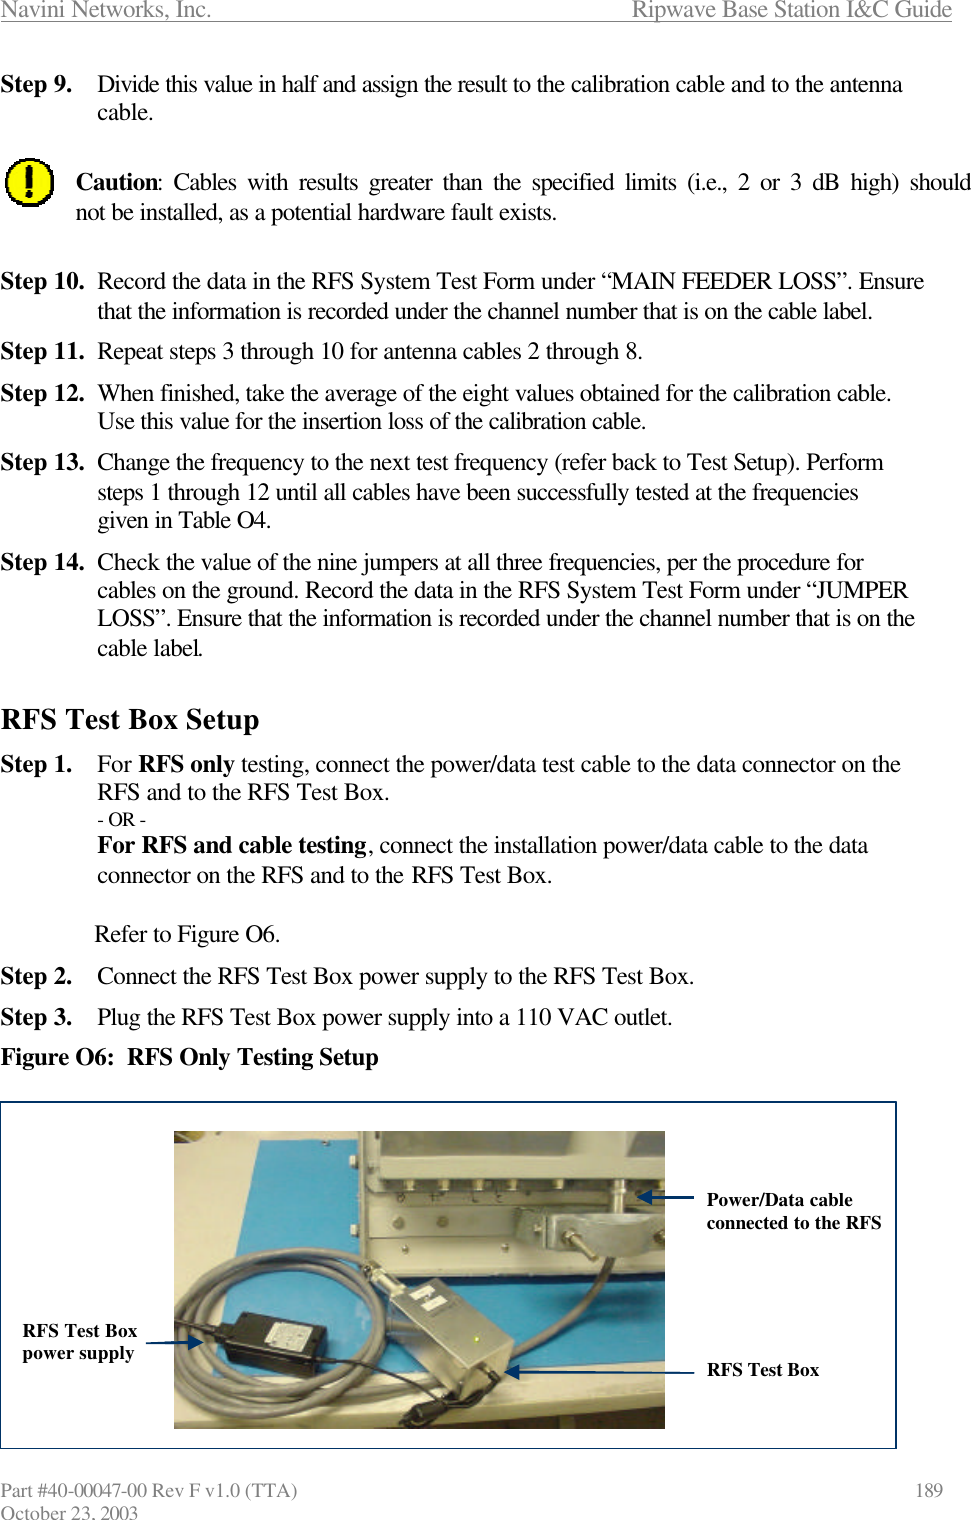 Navini Networks, Inc.                      Ripwave Base Station I&amp;C Guide Part #40-00047-00 Rev F v1.0 (TTA)            189 October 23, 2003 Step 9. Divide this value in half and assign the result to the calibration cable and to the antenna cable.  Caution: Cables with results greater than the specified limits (i.e., 2 or 3 dB high) should not be installed, as a potential hardware fault exists.  Step 10. Record the data in the RFS System Test Form under “MAIN FEEDER LOSS”. Ensure that the information is recorded under the channel number that is on the cable label. Step 11. Repeat steps 3 through 10 for antenna cables 2 through 8.  Step 12. When finished, take the average of the eight values obtained for the calibration cable. Use this value for the insertion loss of the calibration cable. Step 13. Change the frequency to the next test frequency (refer back to Test Setup). Perform steps 1 through 12 until all cables have been successfully tested at the frequencies given in Table O4. Step 14. Check the value of the nine jumpers at all three frequencies, per the procedure for cables on the ground. Record the data in the RFS System Test Form under “JUMPER LOSS”. Ensure that the information is recorded under the channel number that is on the cable label.  RFS Test Box Setup Step 1. For RFS only testing, connect the power/data test cable to the data connector on the RFS and to the RFS Test Box.  - OR - For RFS and cable testing, connect the installation power/data cable to the data connector on the RFS and to the RFS Test Box.  Refer to Figure O6. Step 2. Connect the RFS Test Box power supply to the RFS Test Box. Step 3. Plug the RFS Test Box power supply into a 110 VAC outlet. Figure O6:  RFS Only Testing Setup             Power/Data cable connected to the RFSRFS Test BoxRFS Test Box power supplyPower/Data cable connected to the RFSRFS Test BoxRFS Test Box power supply